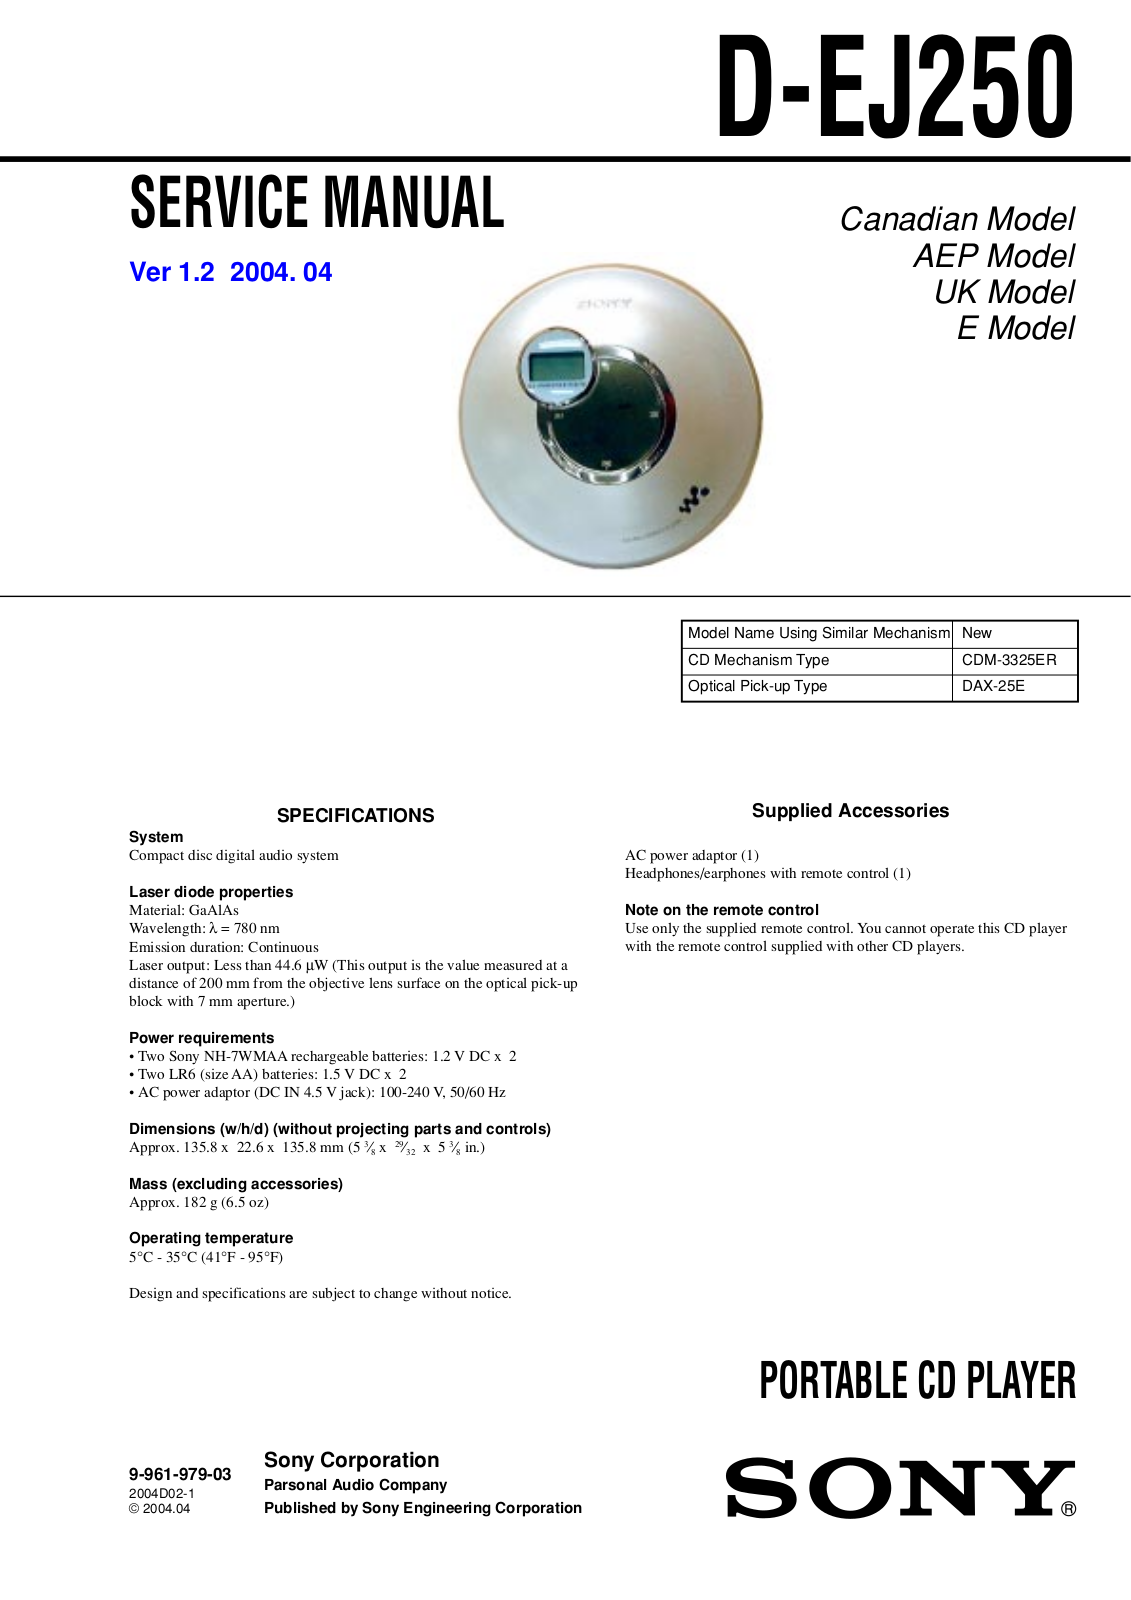 ON Semiconductor D EJ250 Service Manual